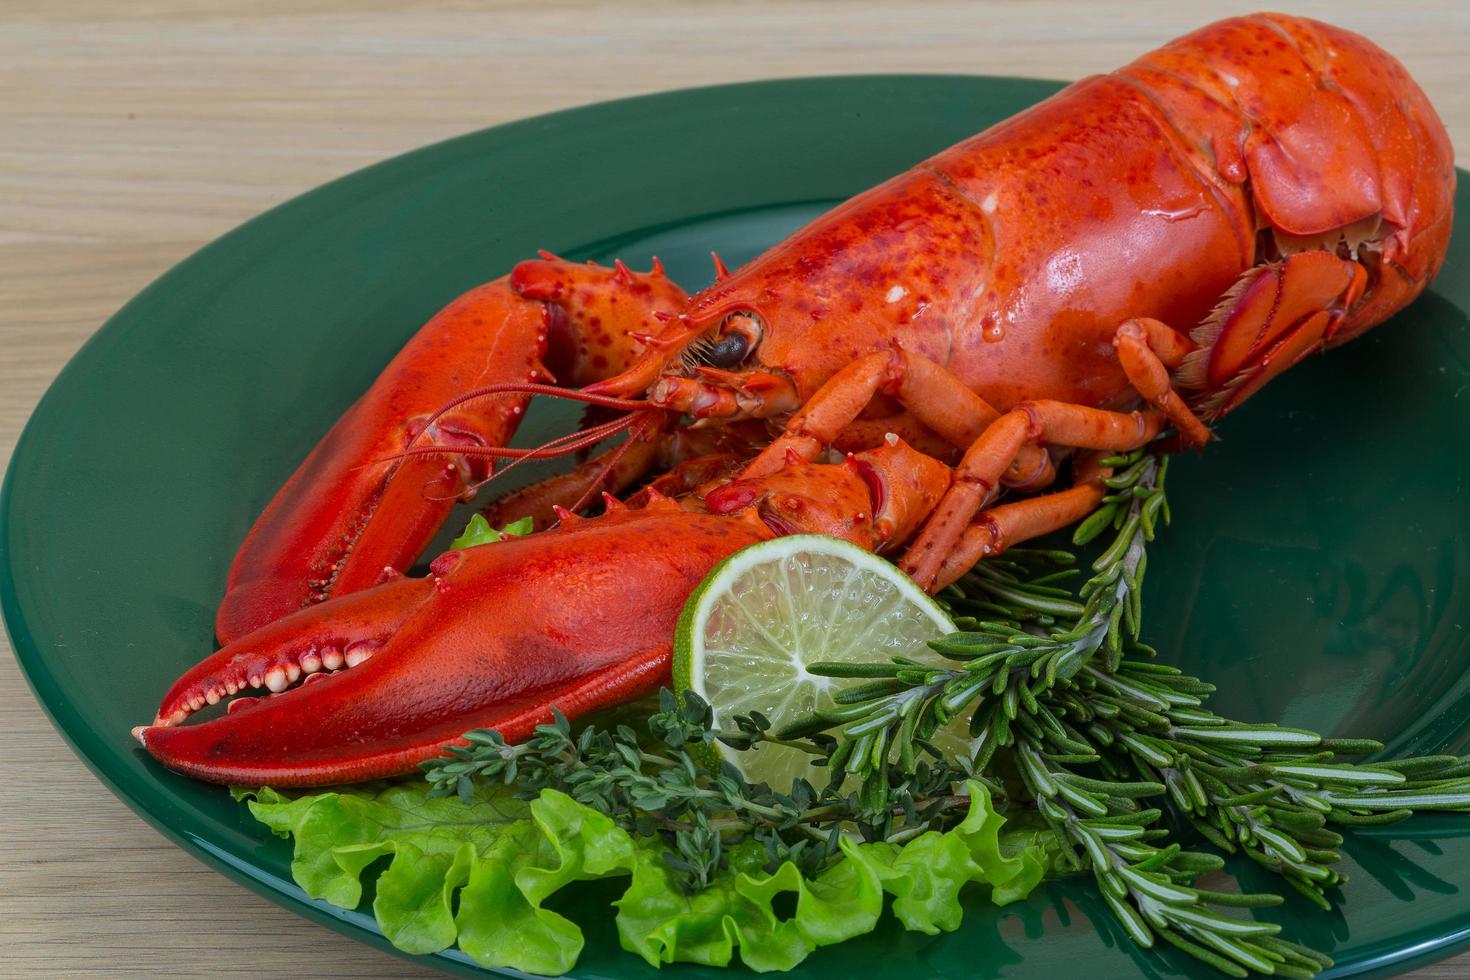 Boiled lobster meal photo